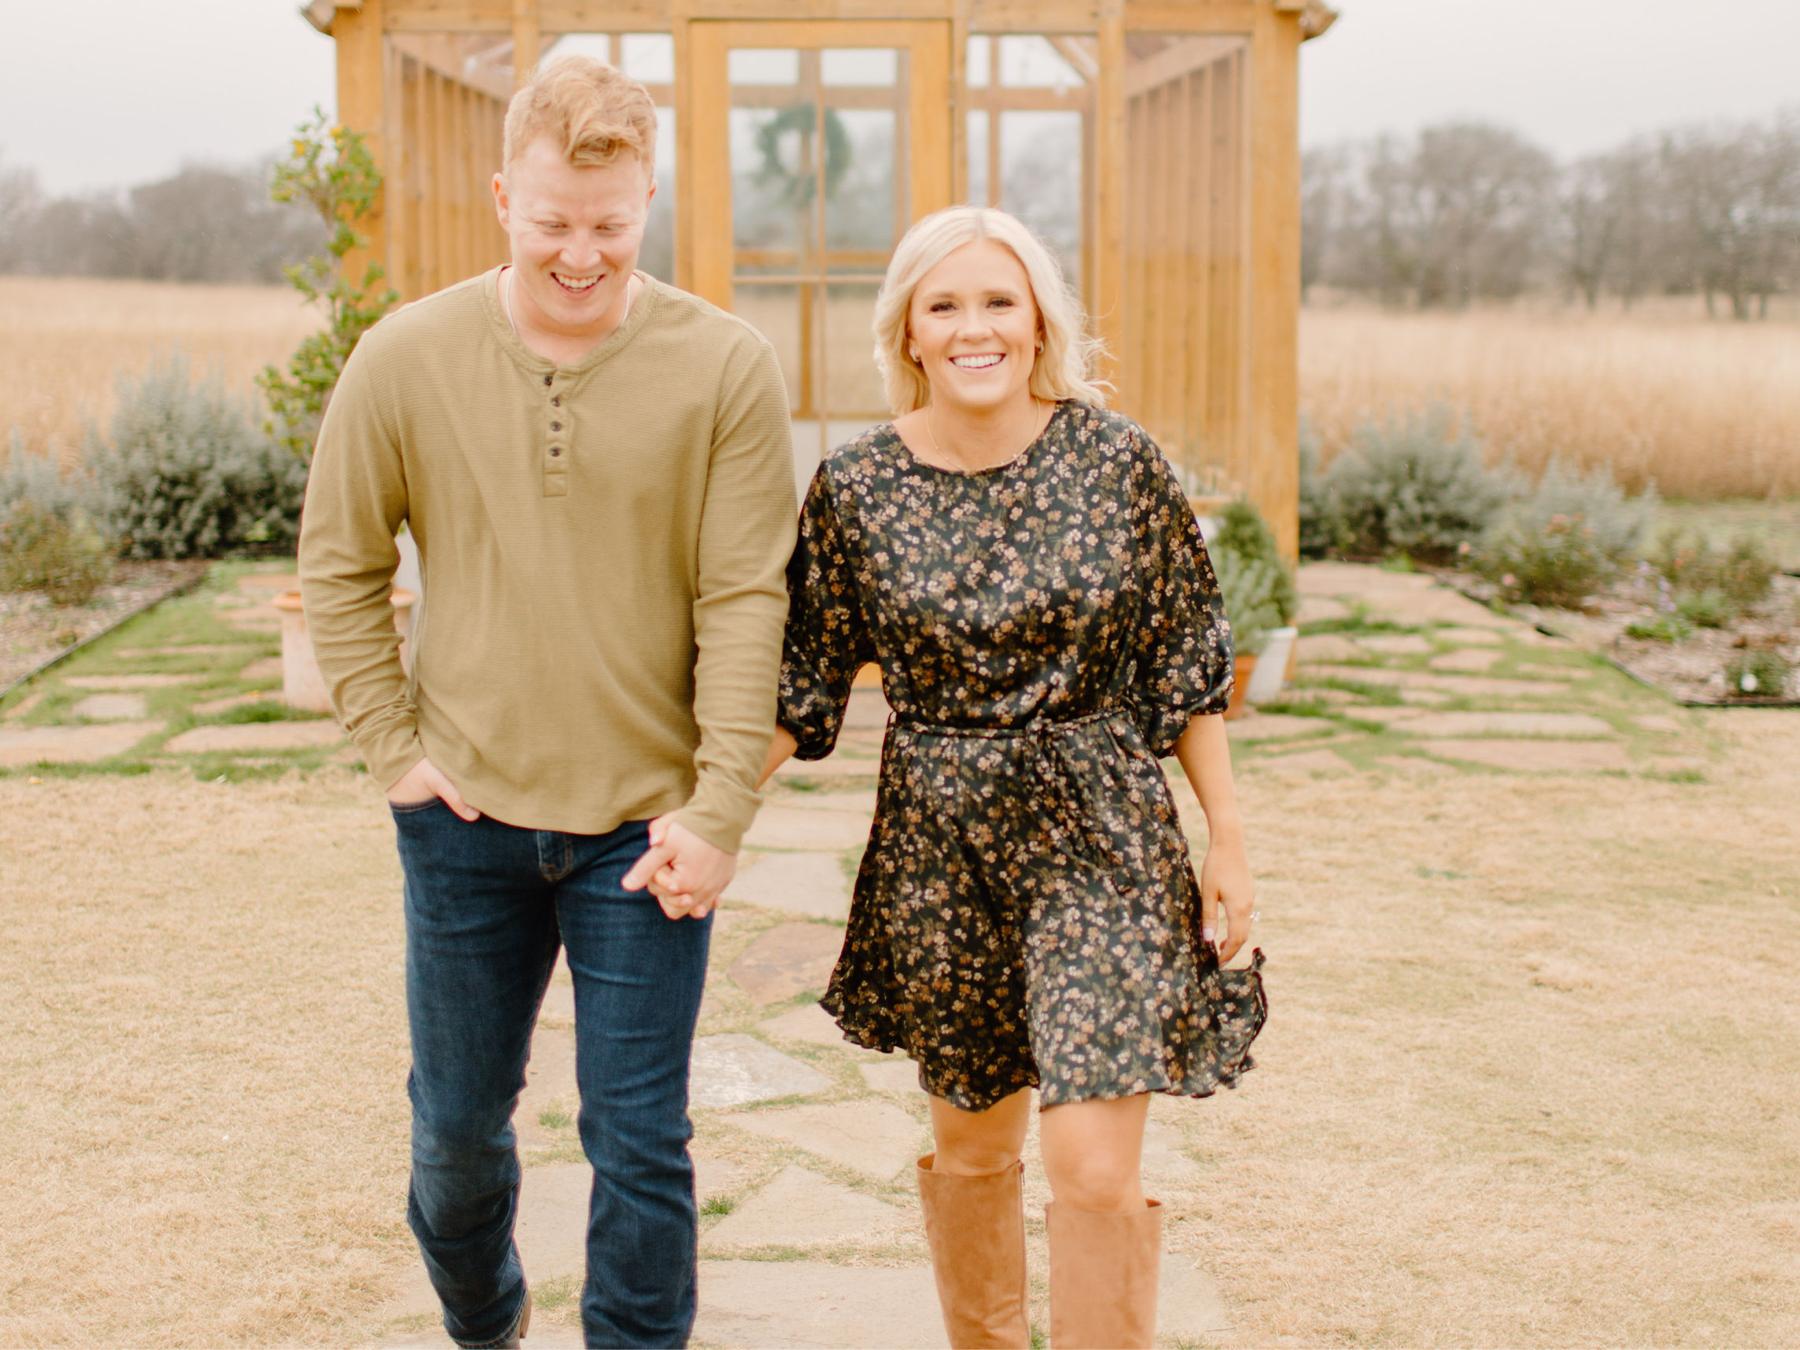 The Wedding Website of Aubrea Collister and Austin O'Dell